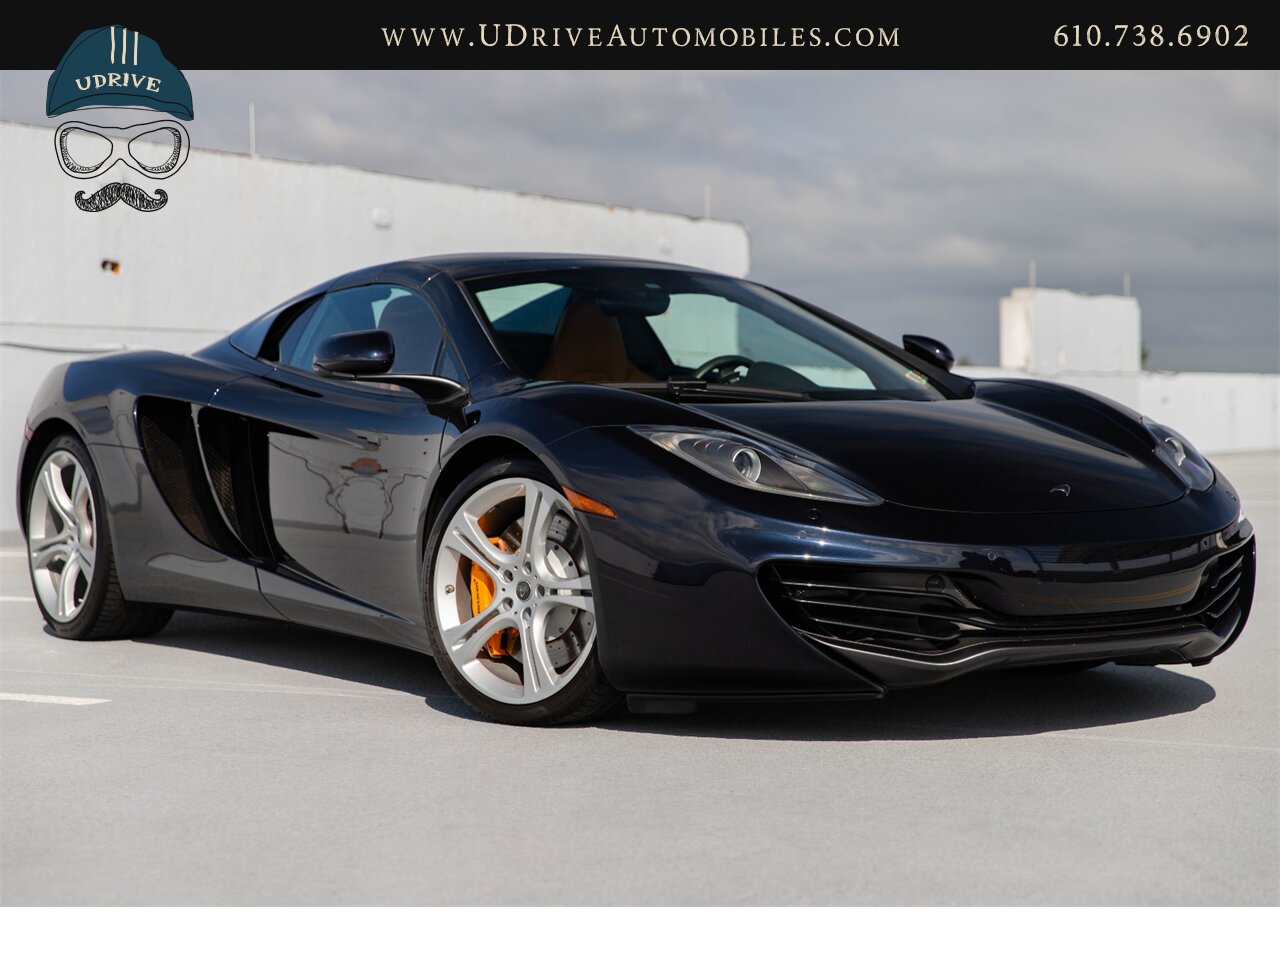 2013 McLaren MP4-12C Spider 1 Owner 6k Miles Carbon Fiber Full Leather  Sapphire Black over Natural Tan Leather - Photo 4 - West Chester, PA 19382